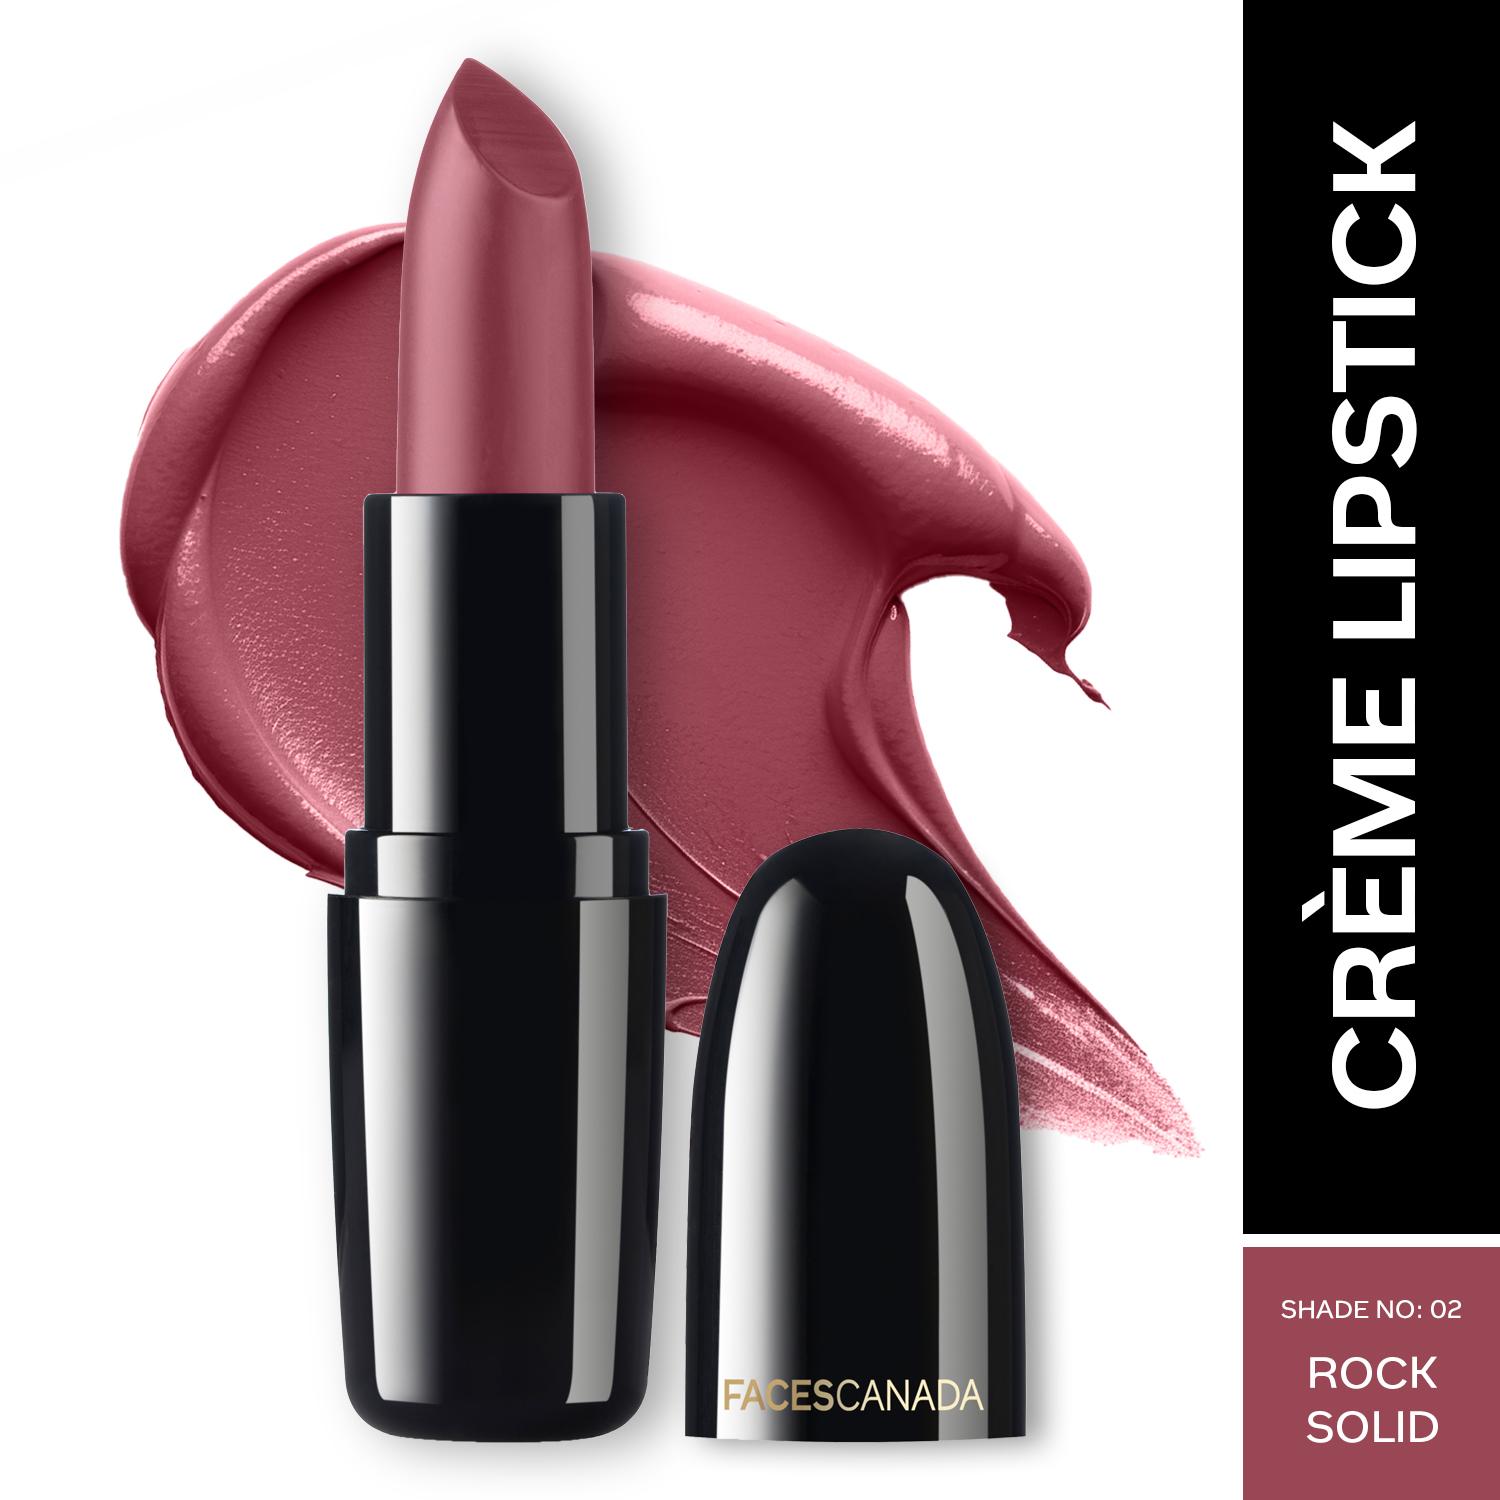 Faces Canada | Faces Canada Weightless Creme Finish Lipstick, Creamy Finish, Hydrated Lips - Rock Solid 02 (4 g)